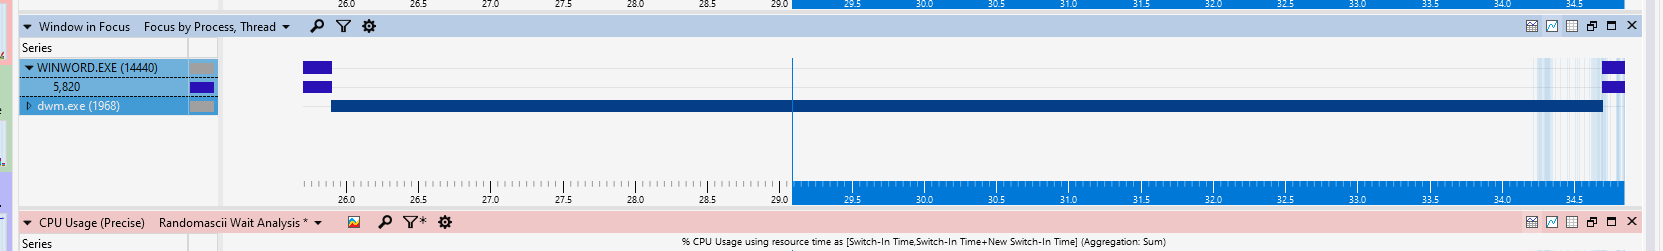 Windows Performance Analyzer, showing "Window in focus" graph view. WINWORD.EXE, thread 5820 is in focus for a brief period, when the focus graph shows dwm.exe taking over focus